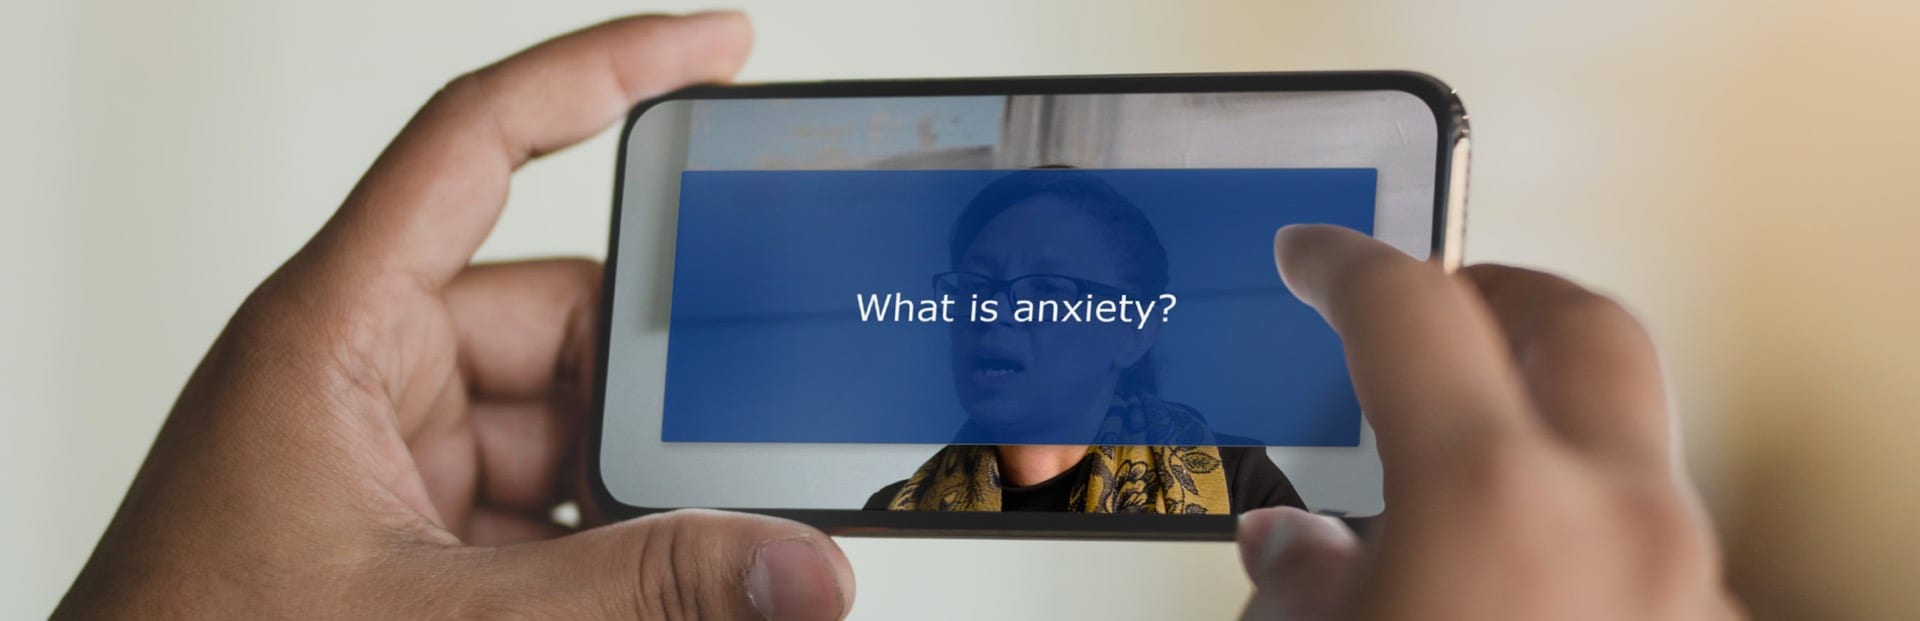 Elearning Course Resources by Upskill People wellbeing anxiety video image